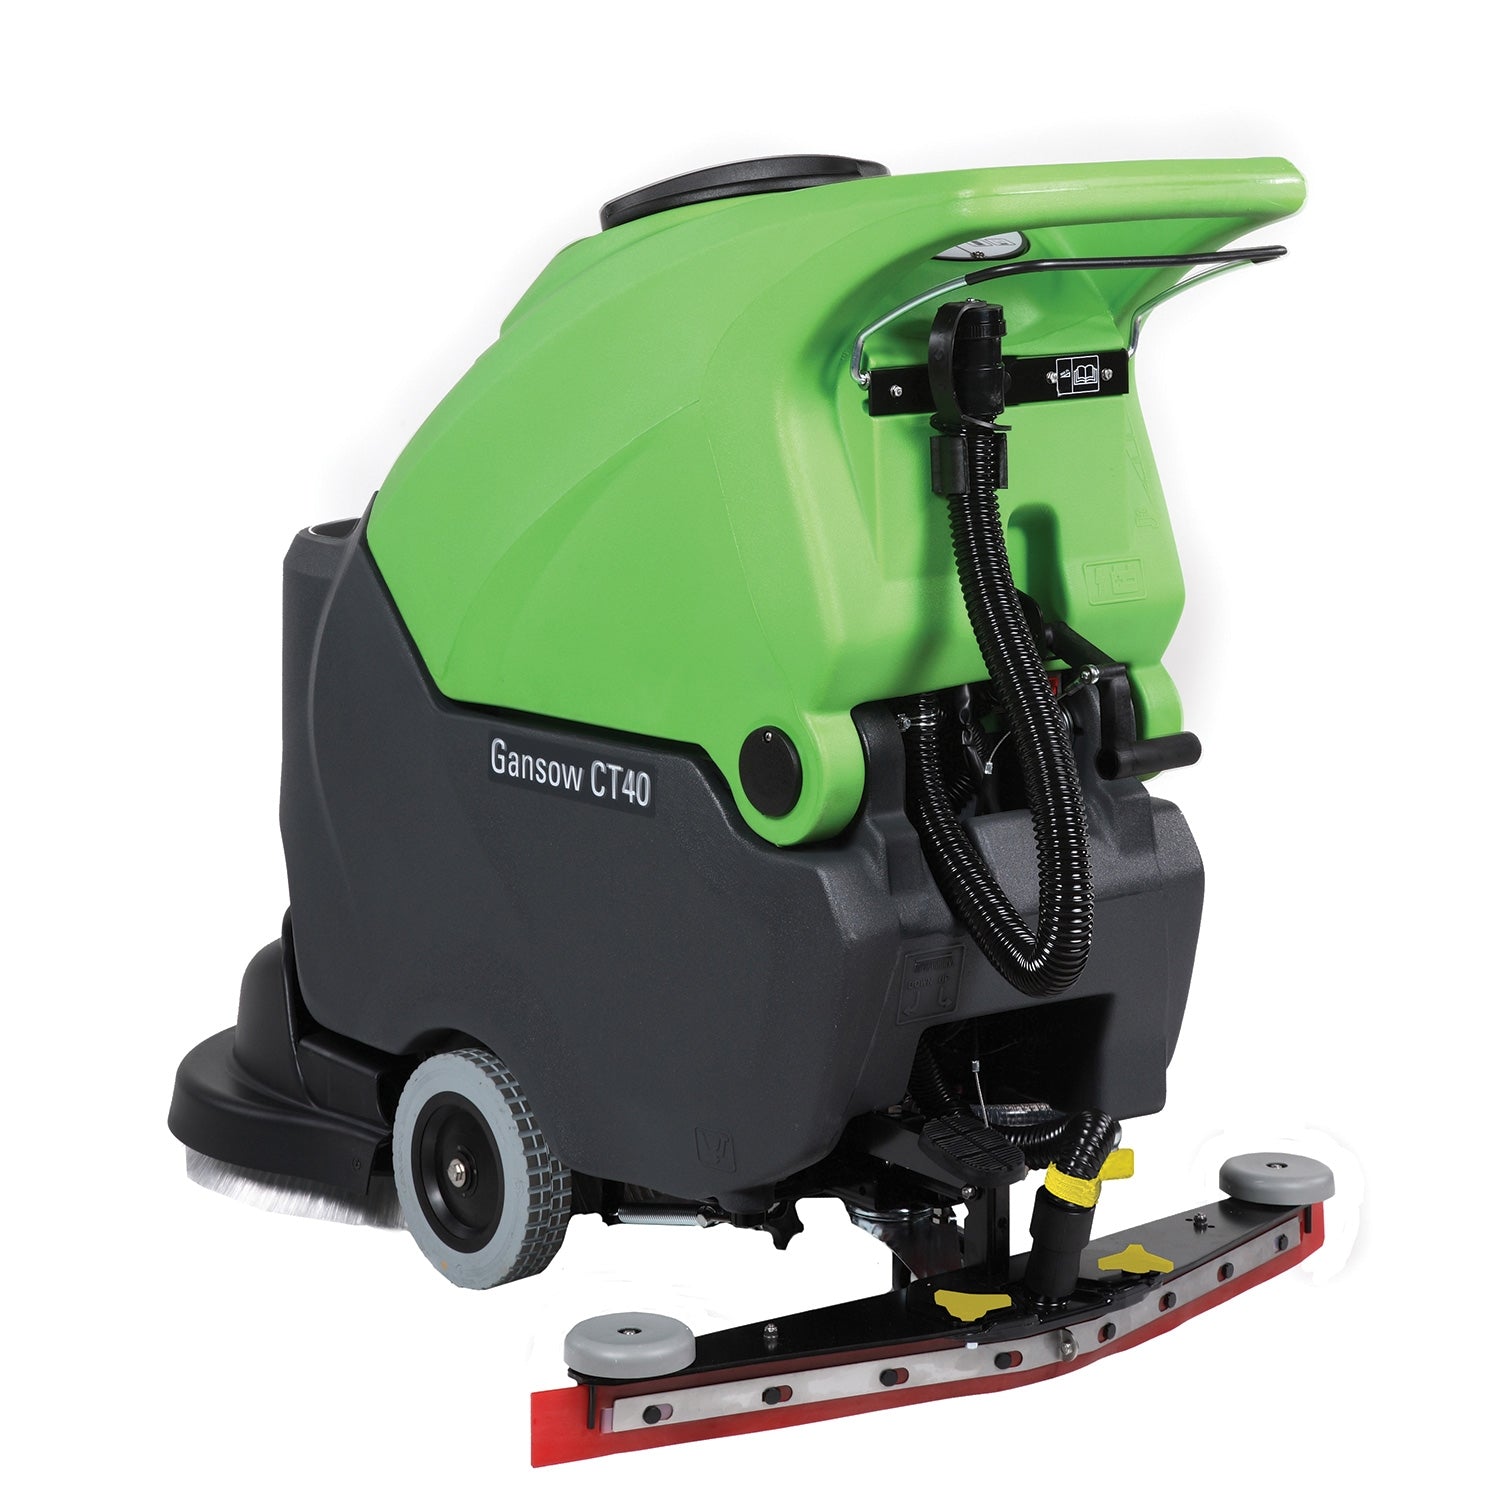 IPC Eagle CT40BT50-OBC(P)-115AGM 20" Traction Drive Automatic Scrubber with 115 Ah AGM Battery and Pad Driver